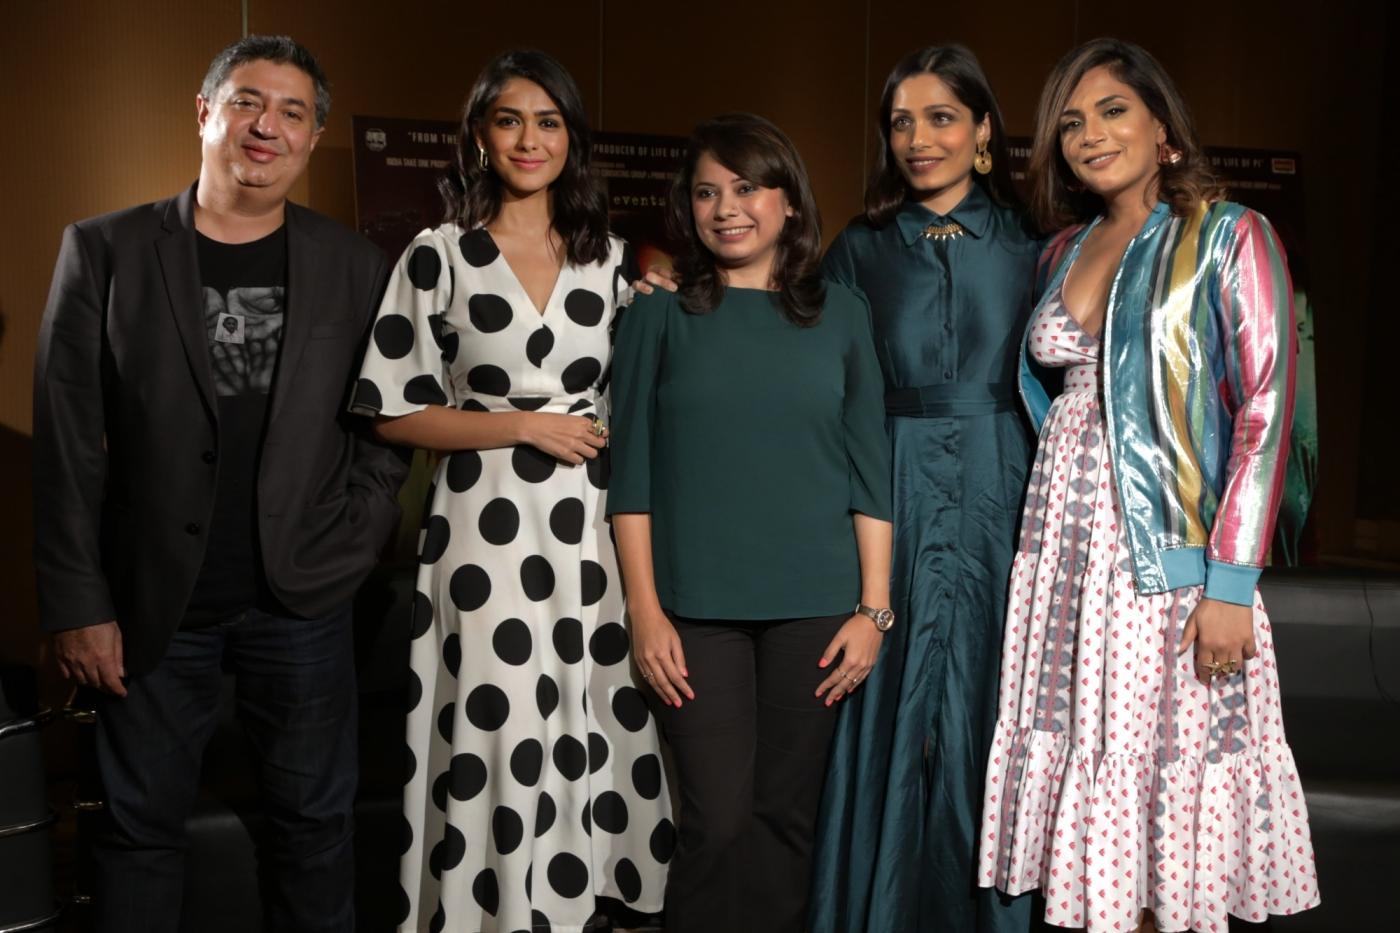 New Delhi: Director Tabrez Noorani with actors Mrunal Thakur, Freida Pinto and Richa Chadda during a promotional photoshoot for their upcoming film "Love Sonia", in New Delhi on Sept 13, 2018. (Photo: Amlan Paliwal/IANS) by .